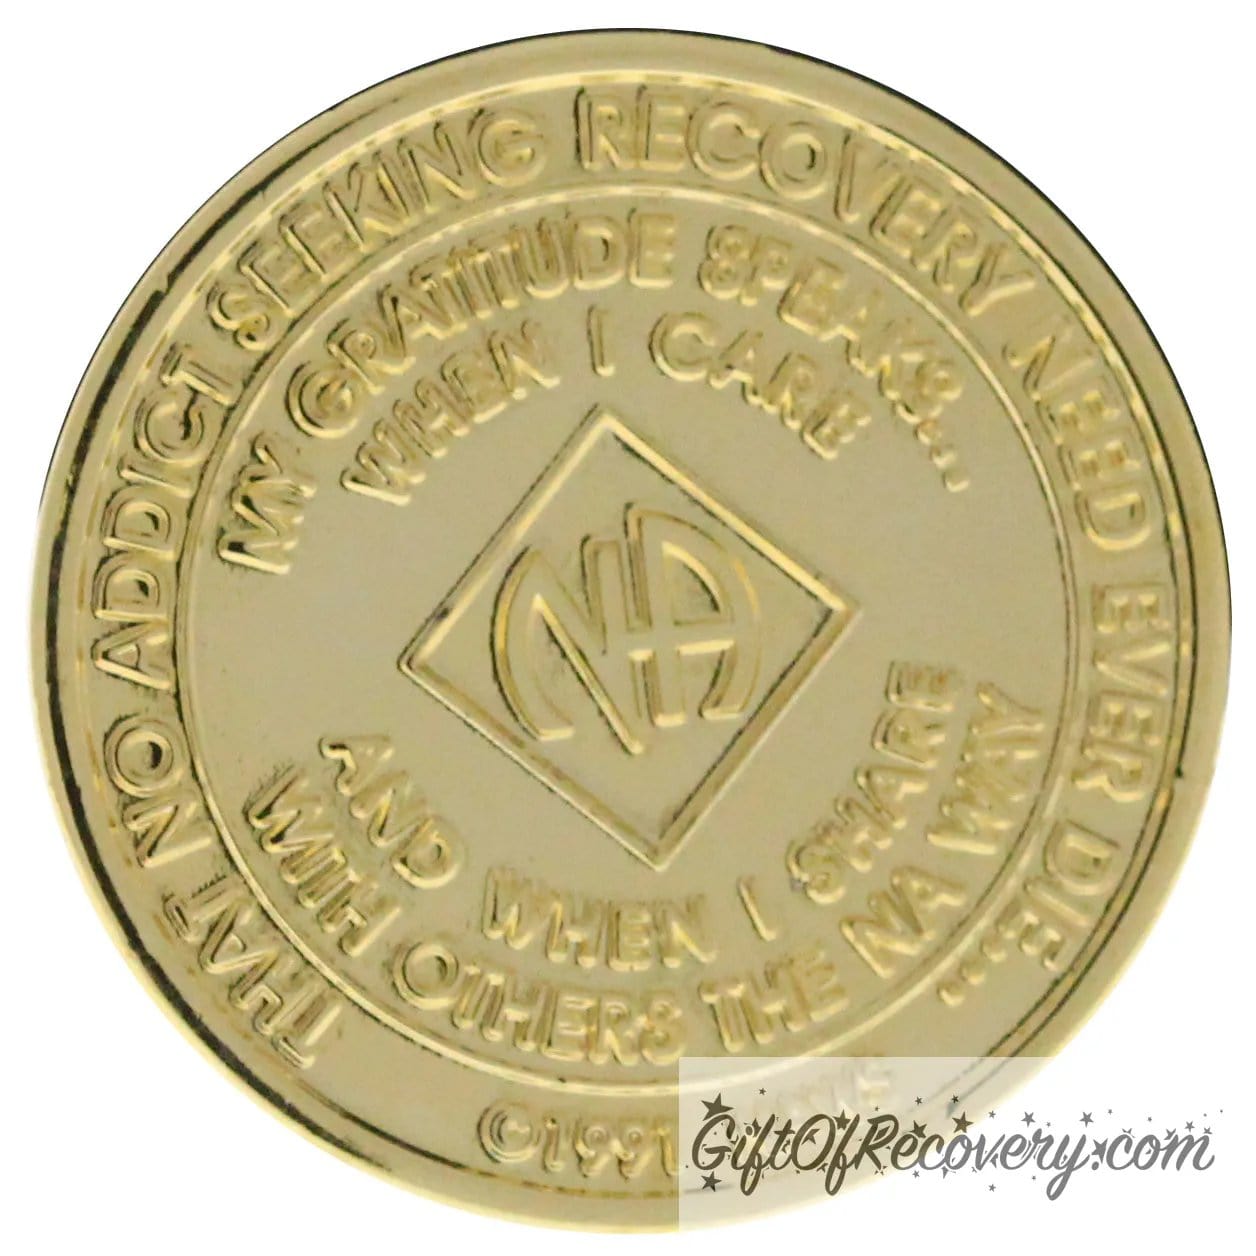 Clean Time Chip Narcotics Anonymous Gold Plate